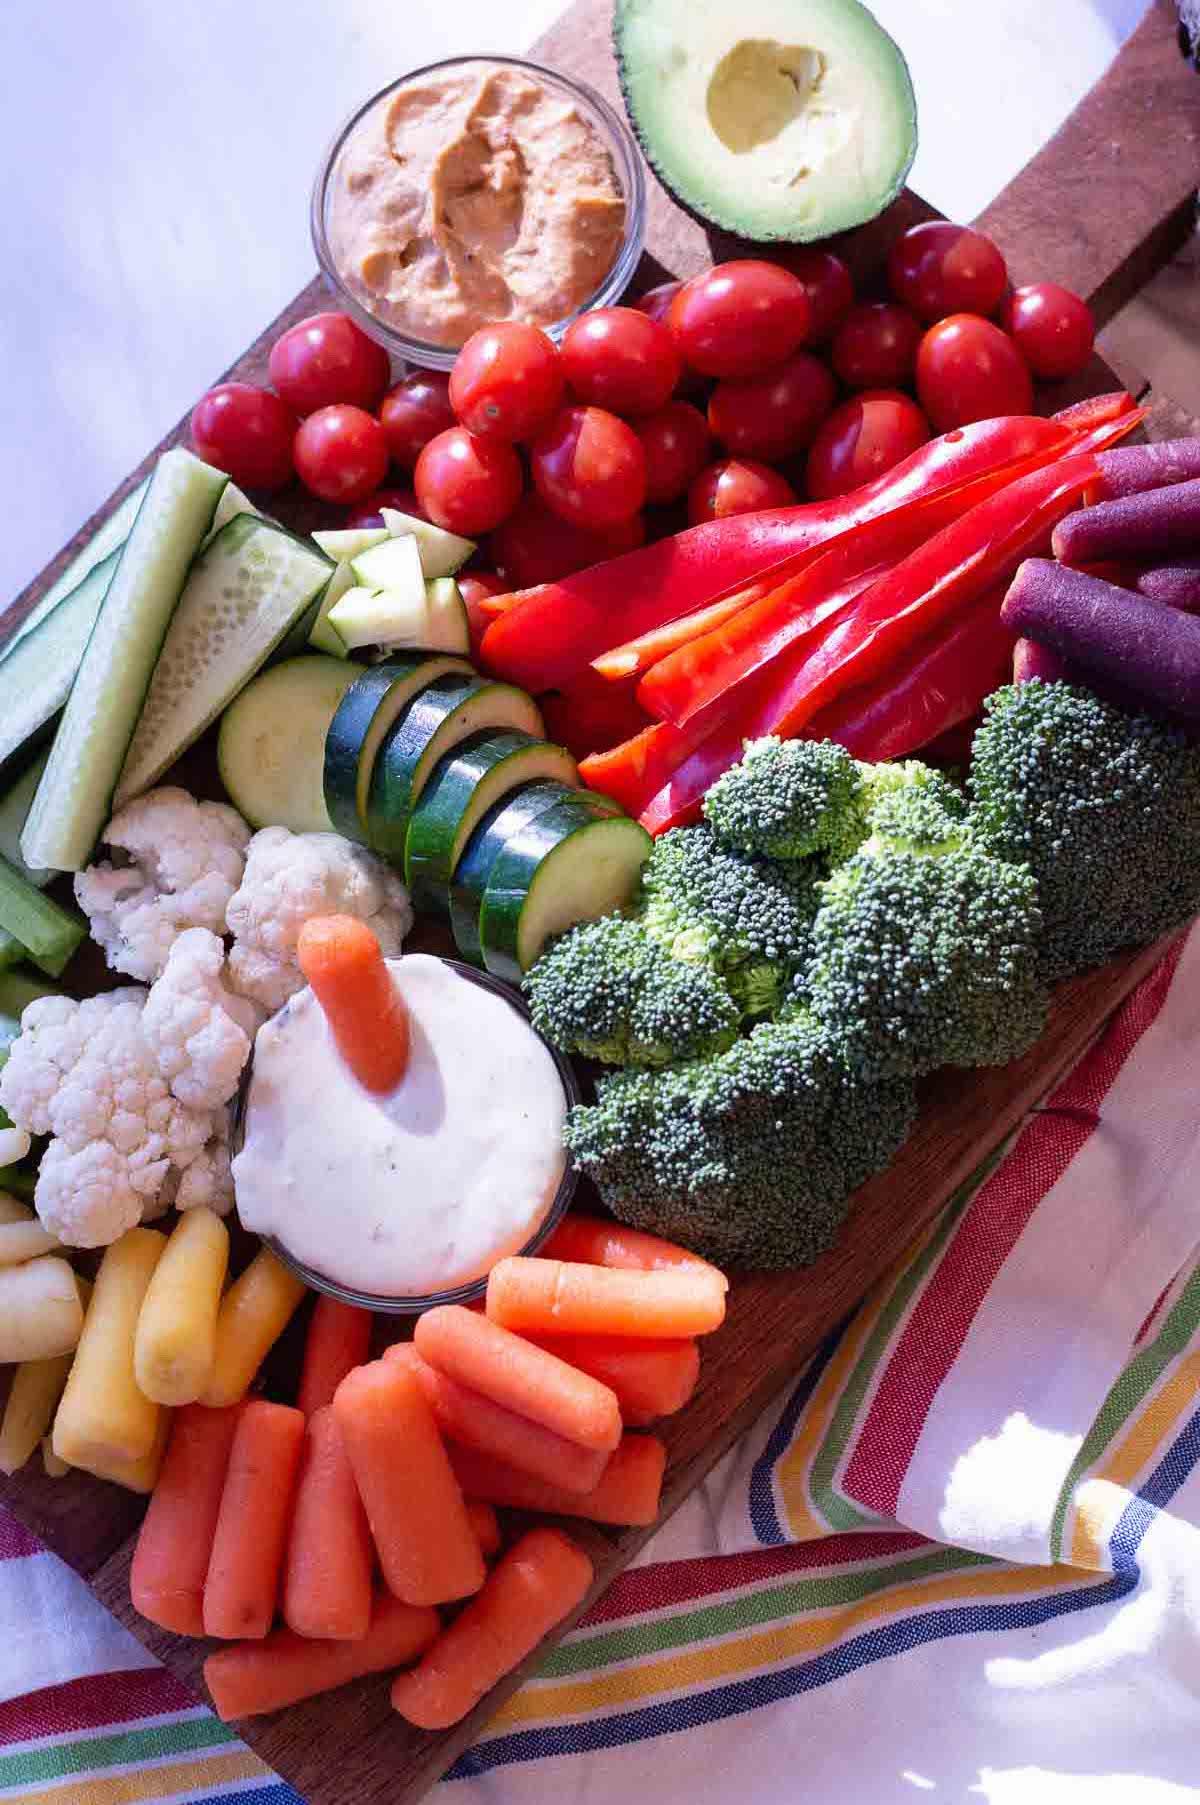 Rainbow Charcuterie Board with a variety of veggies